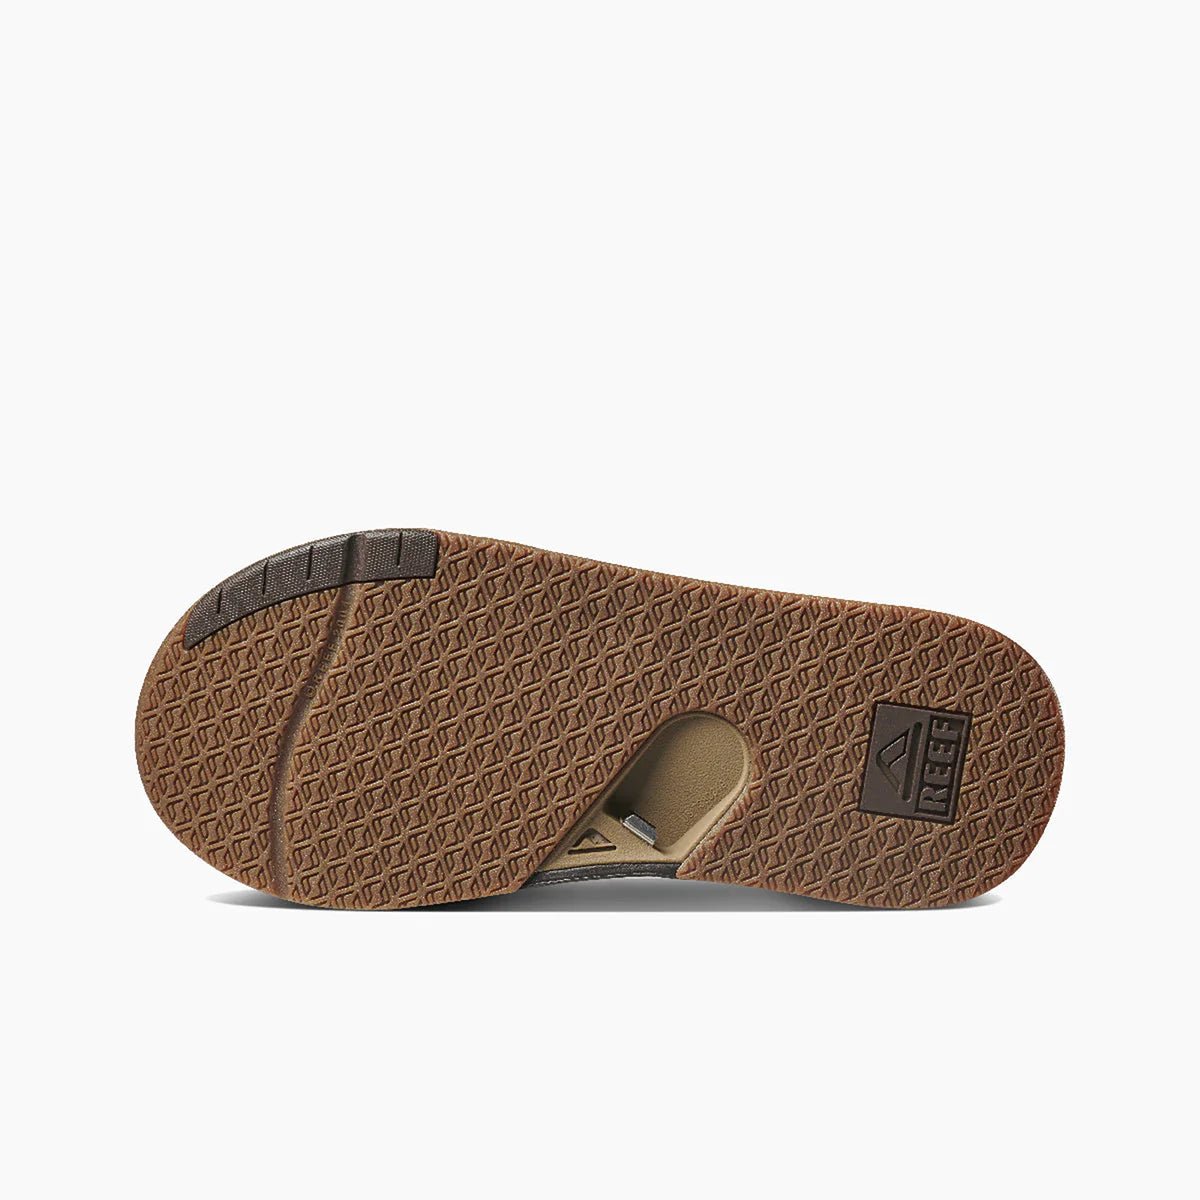 Mens REEF Fanning Low Sandals - Worthing Watersports - Shoes - REEF